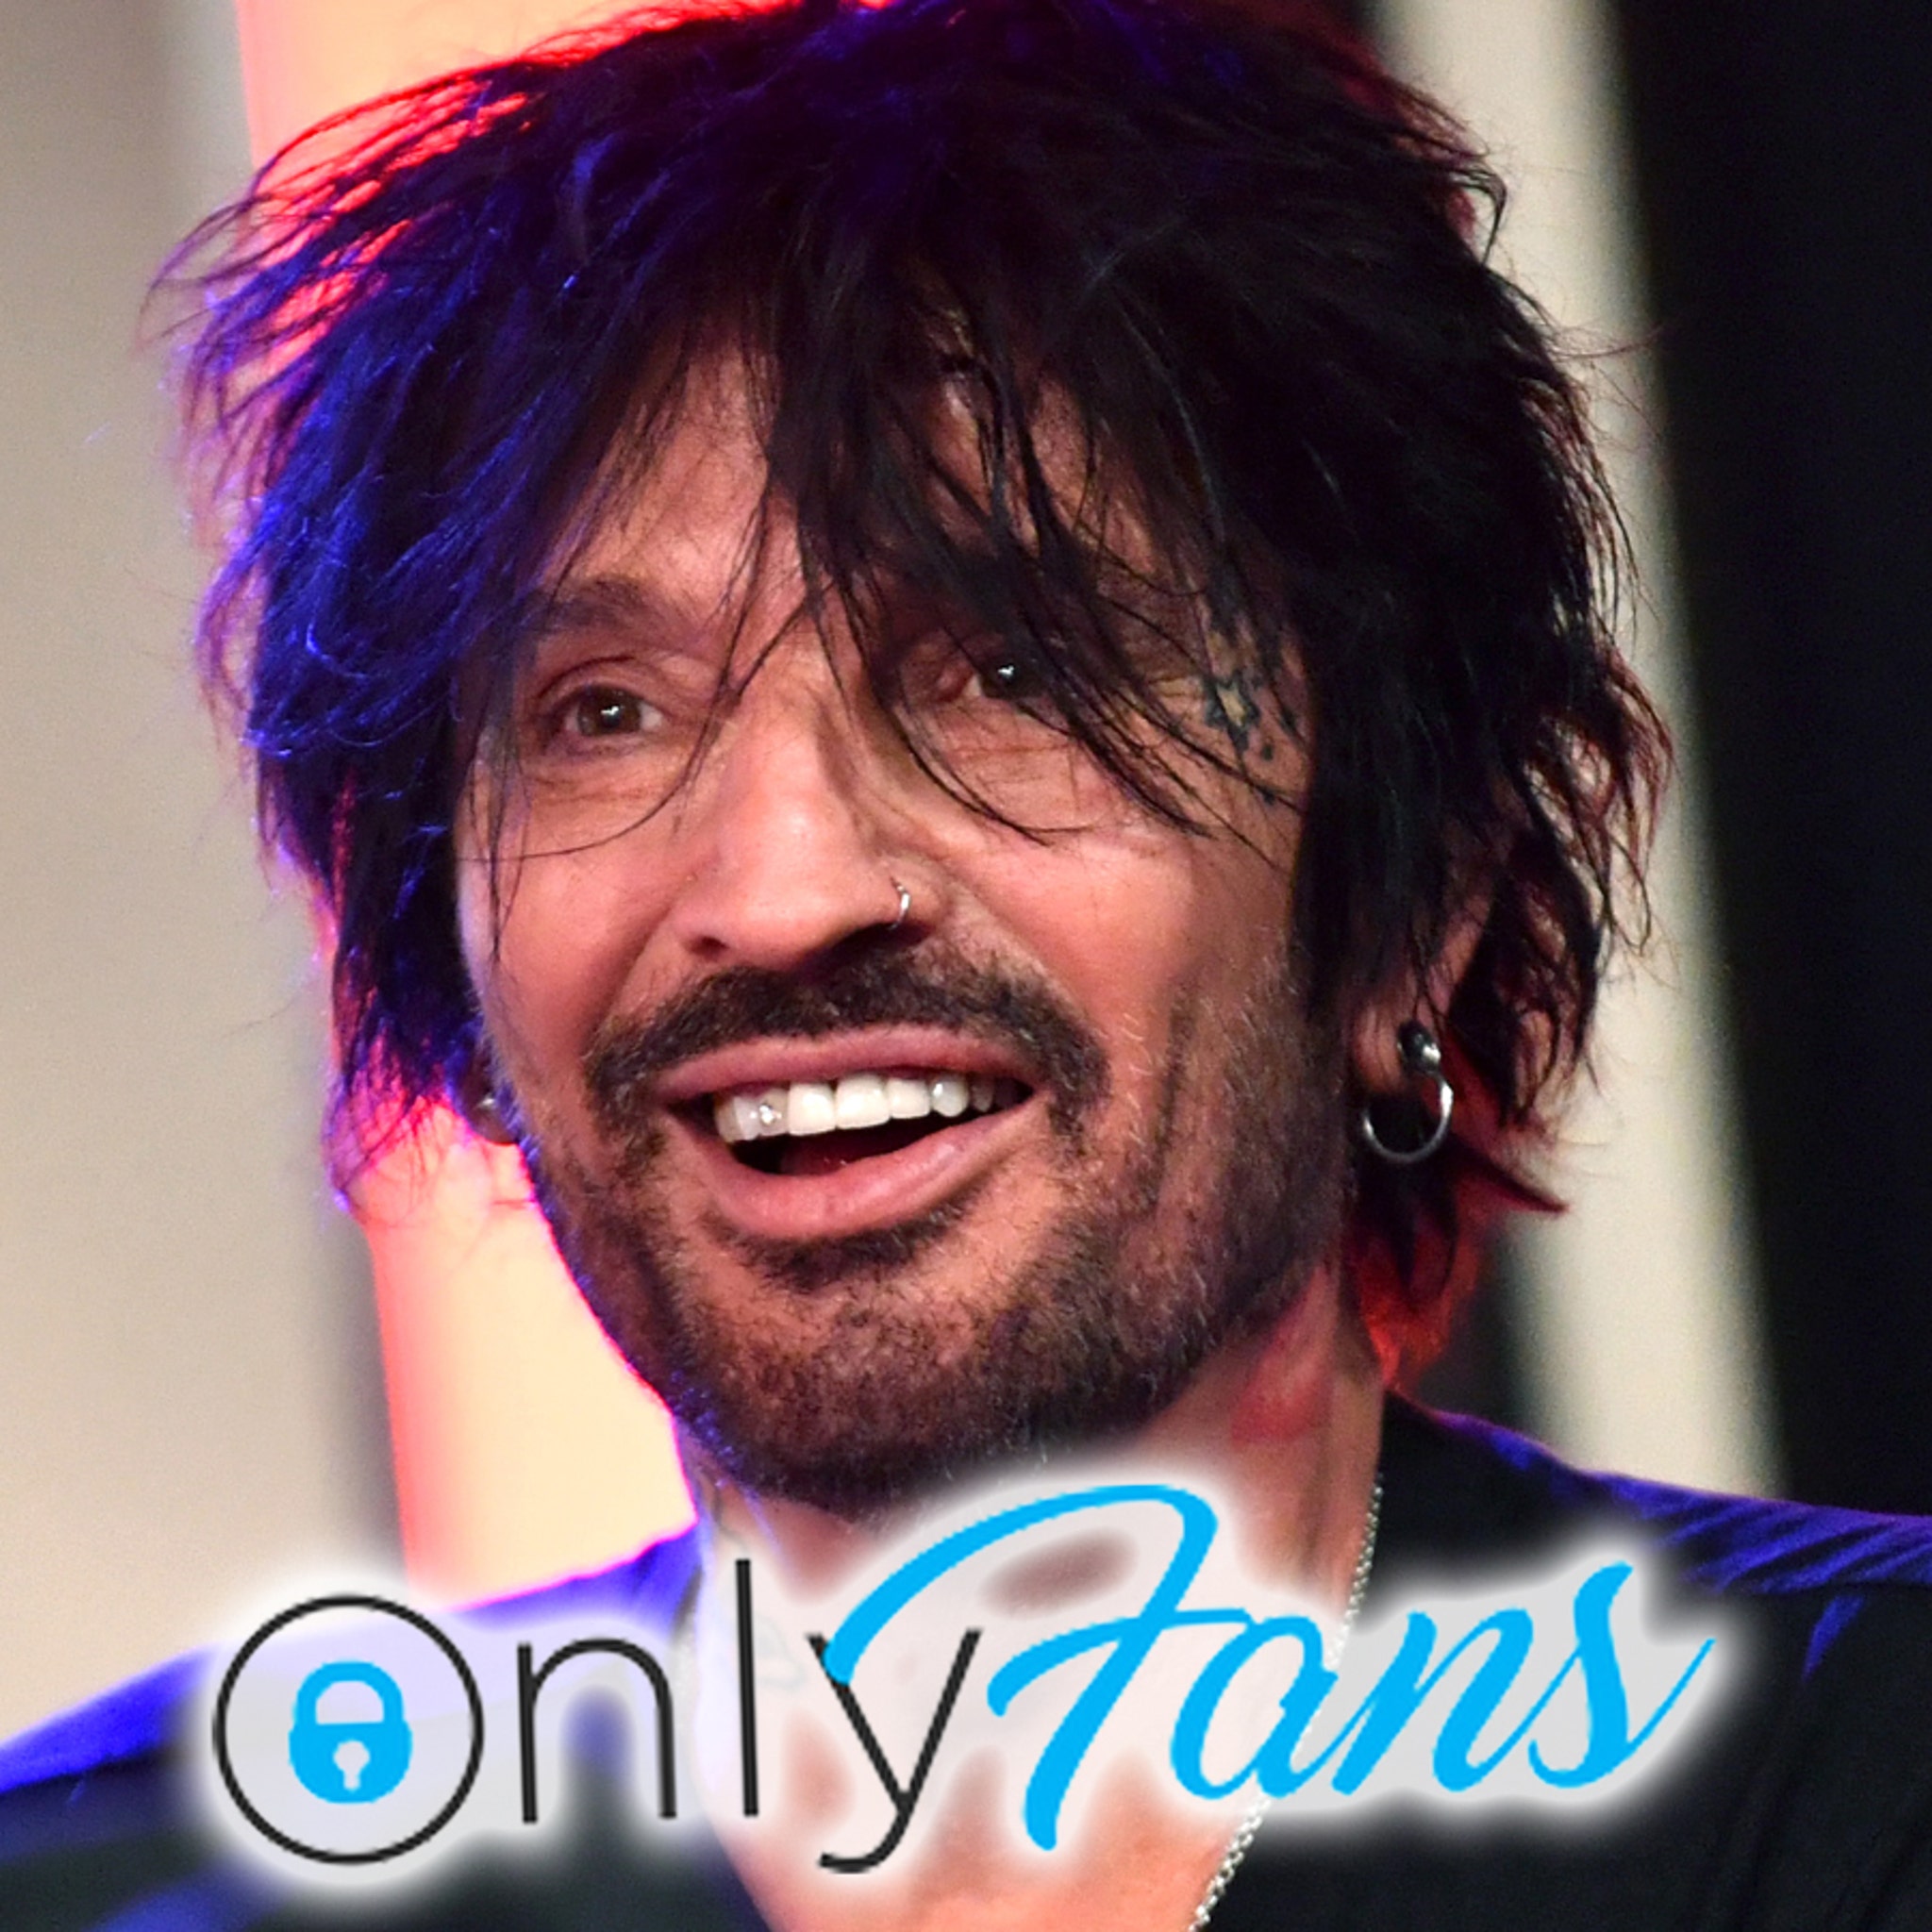 Tommy Lee Joins OnlyFans, Makes Announcement in Vegas